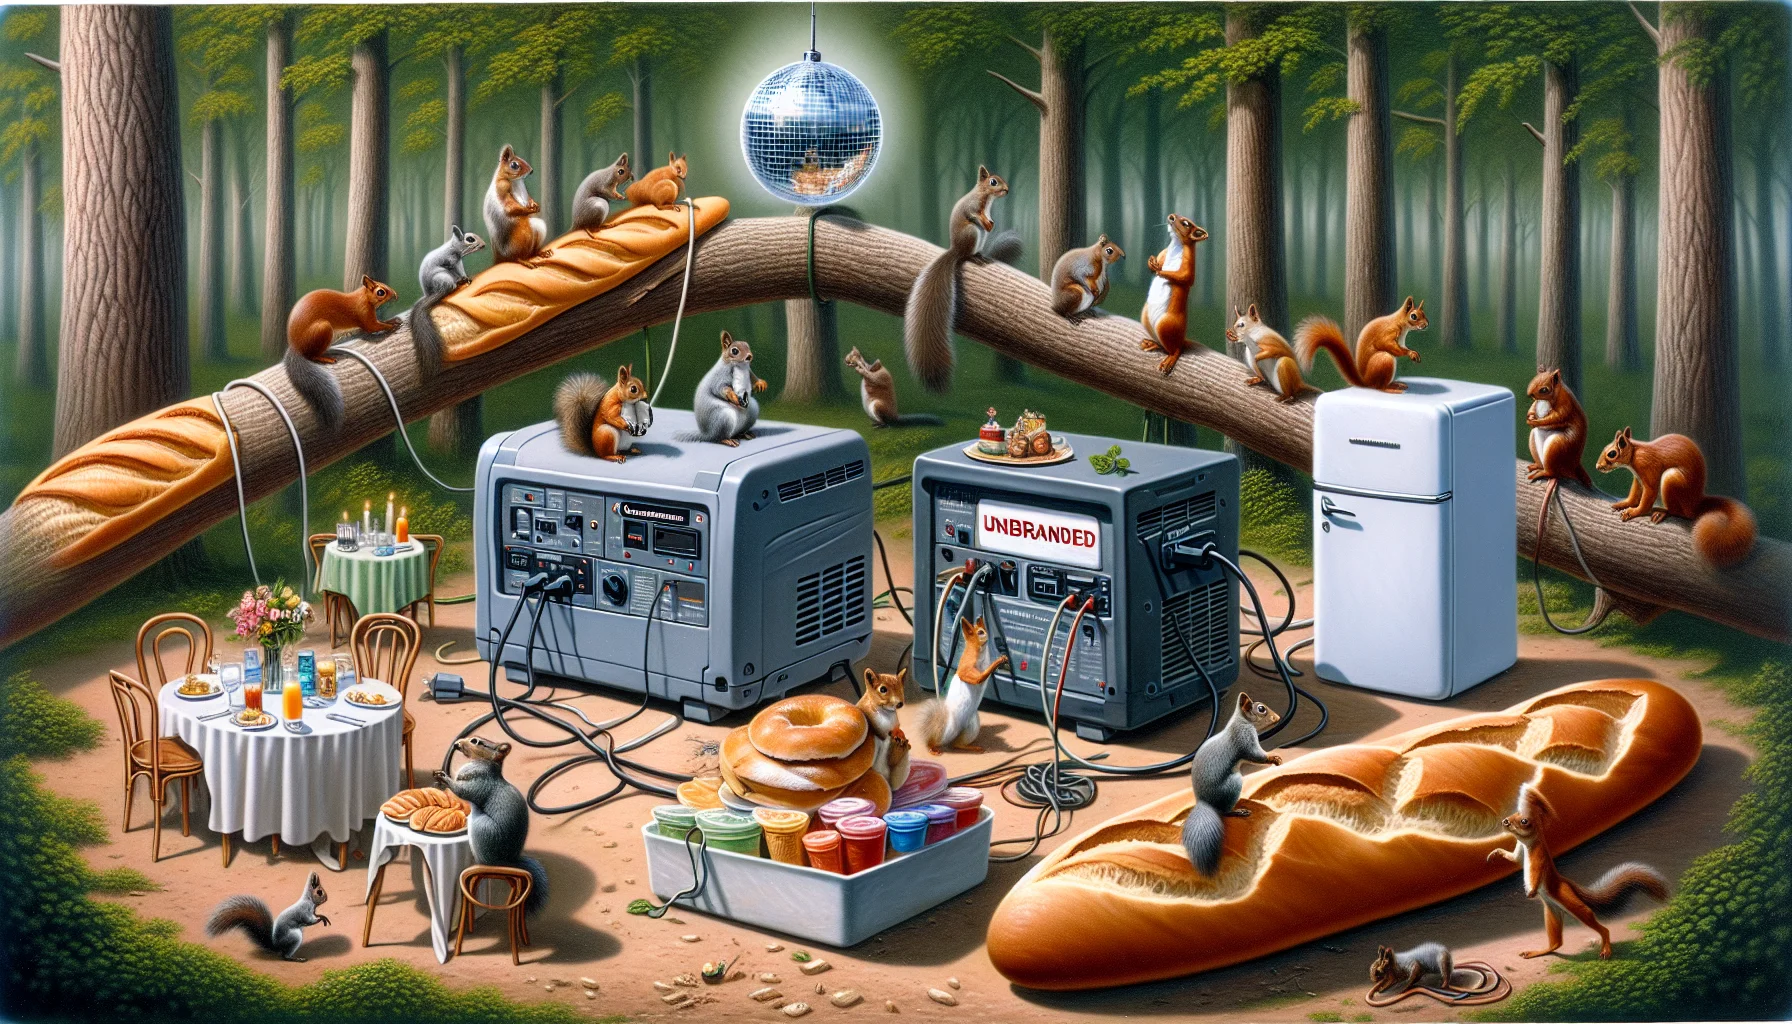 Imagine a comedic scene depicting a range of unbranded power generators as the stars of the show. Placed strategically at unusual places like on a tree branch, sandwiched between two large baguettes, or having a small wedding ceremony, these are being used to power various objects like a disco ball, a fridge full of gelato, or a vintage television set playing cartoons. The backdrop could be a forest in the daytime with animals gathered around, curiously observing the spectacle and some might even be participating, such as a squirrel disco-dancing under the ball.